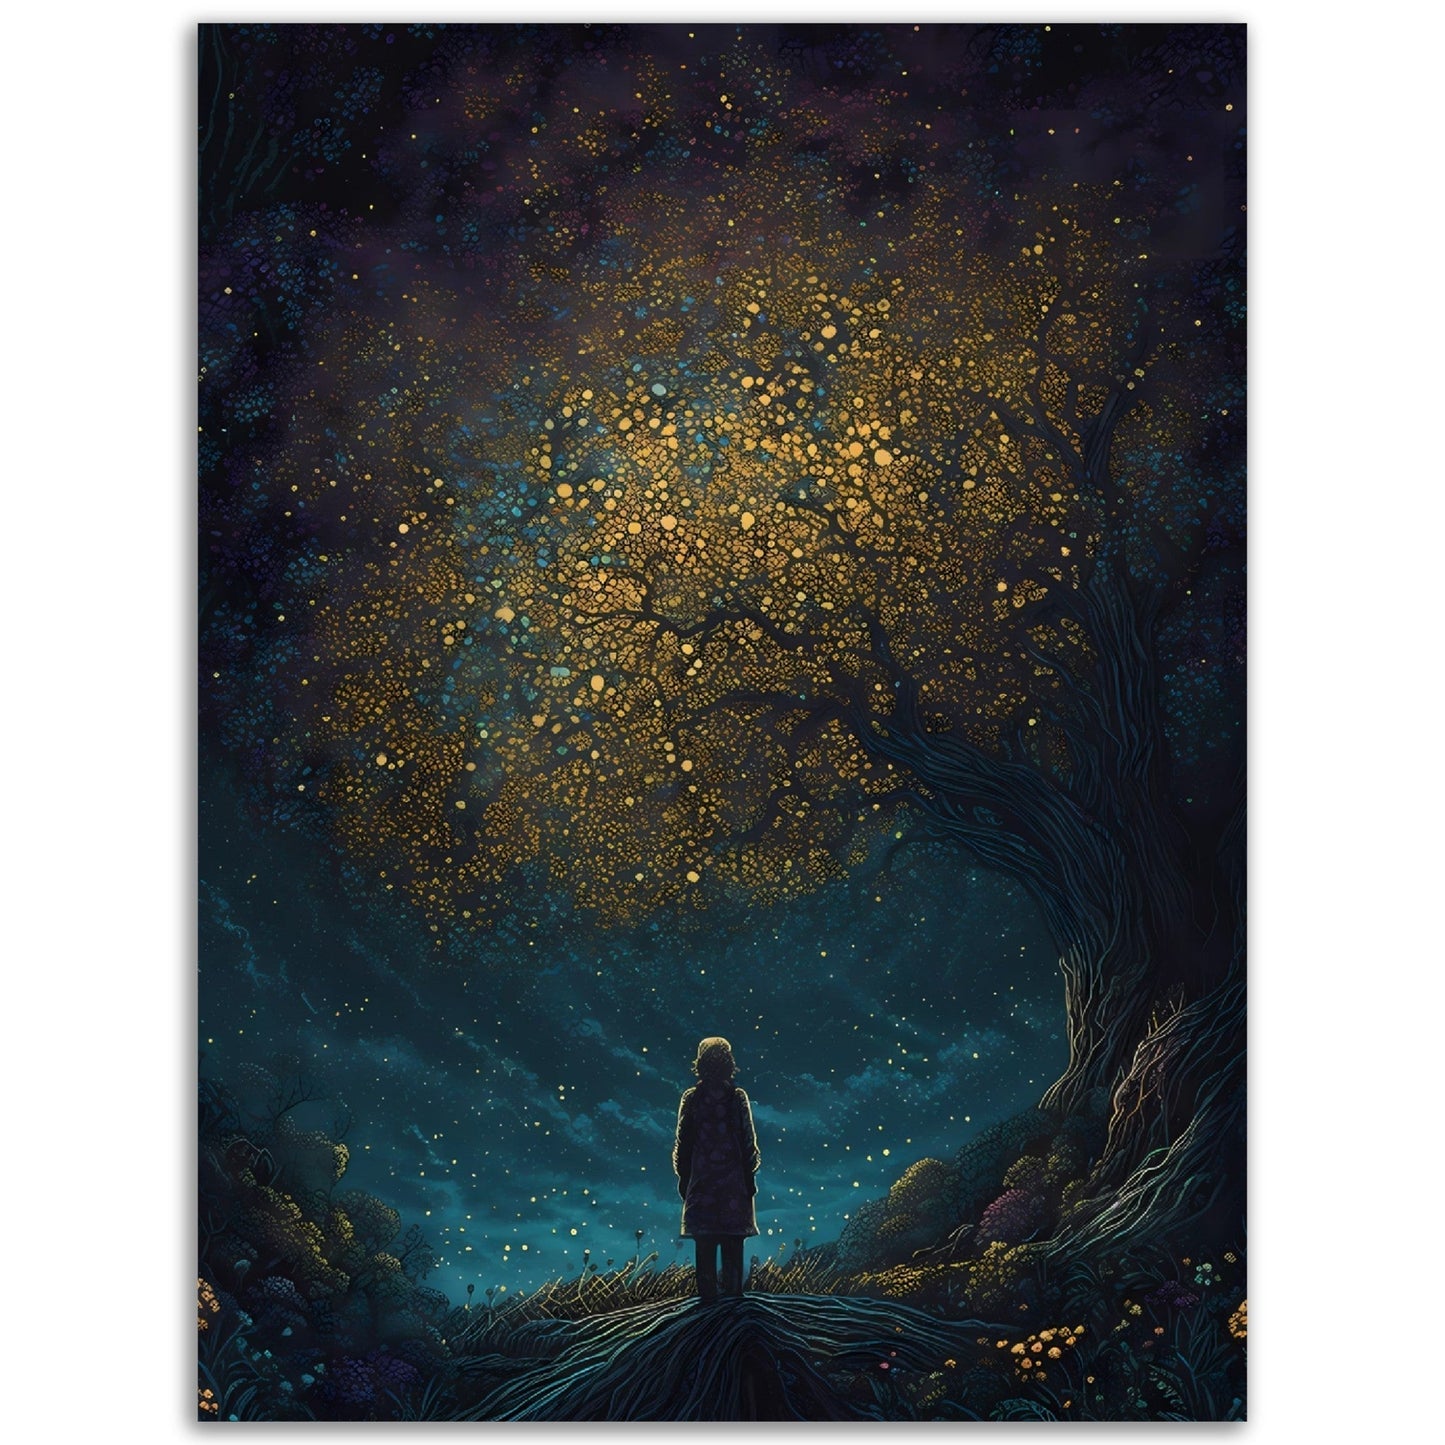 A beautiful colored Twilight Pondering poster by The Golden Tree of a girl standing under a tree with stars in the sky, perfect for room decoration or as part of a poster wall art collection.